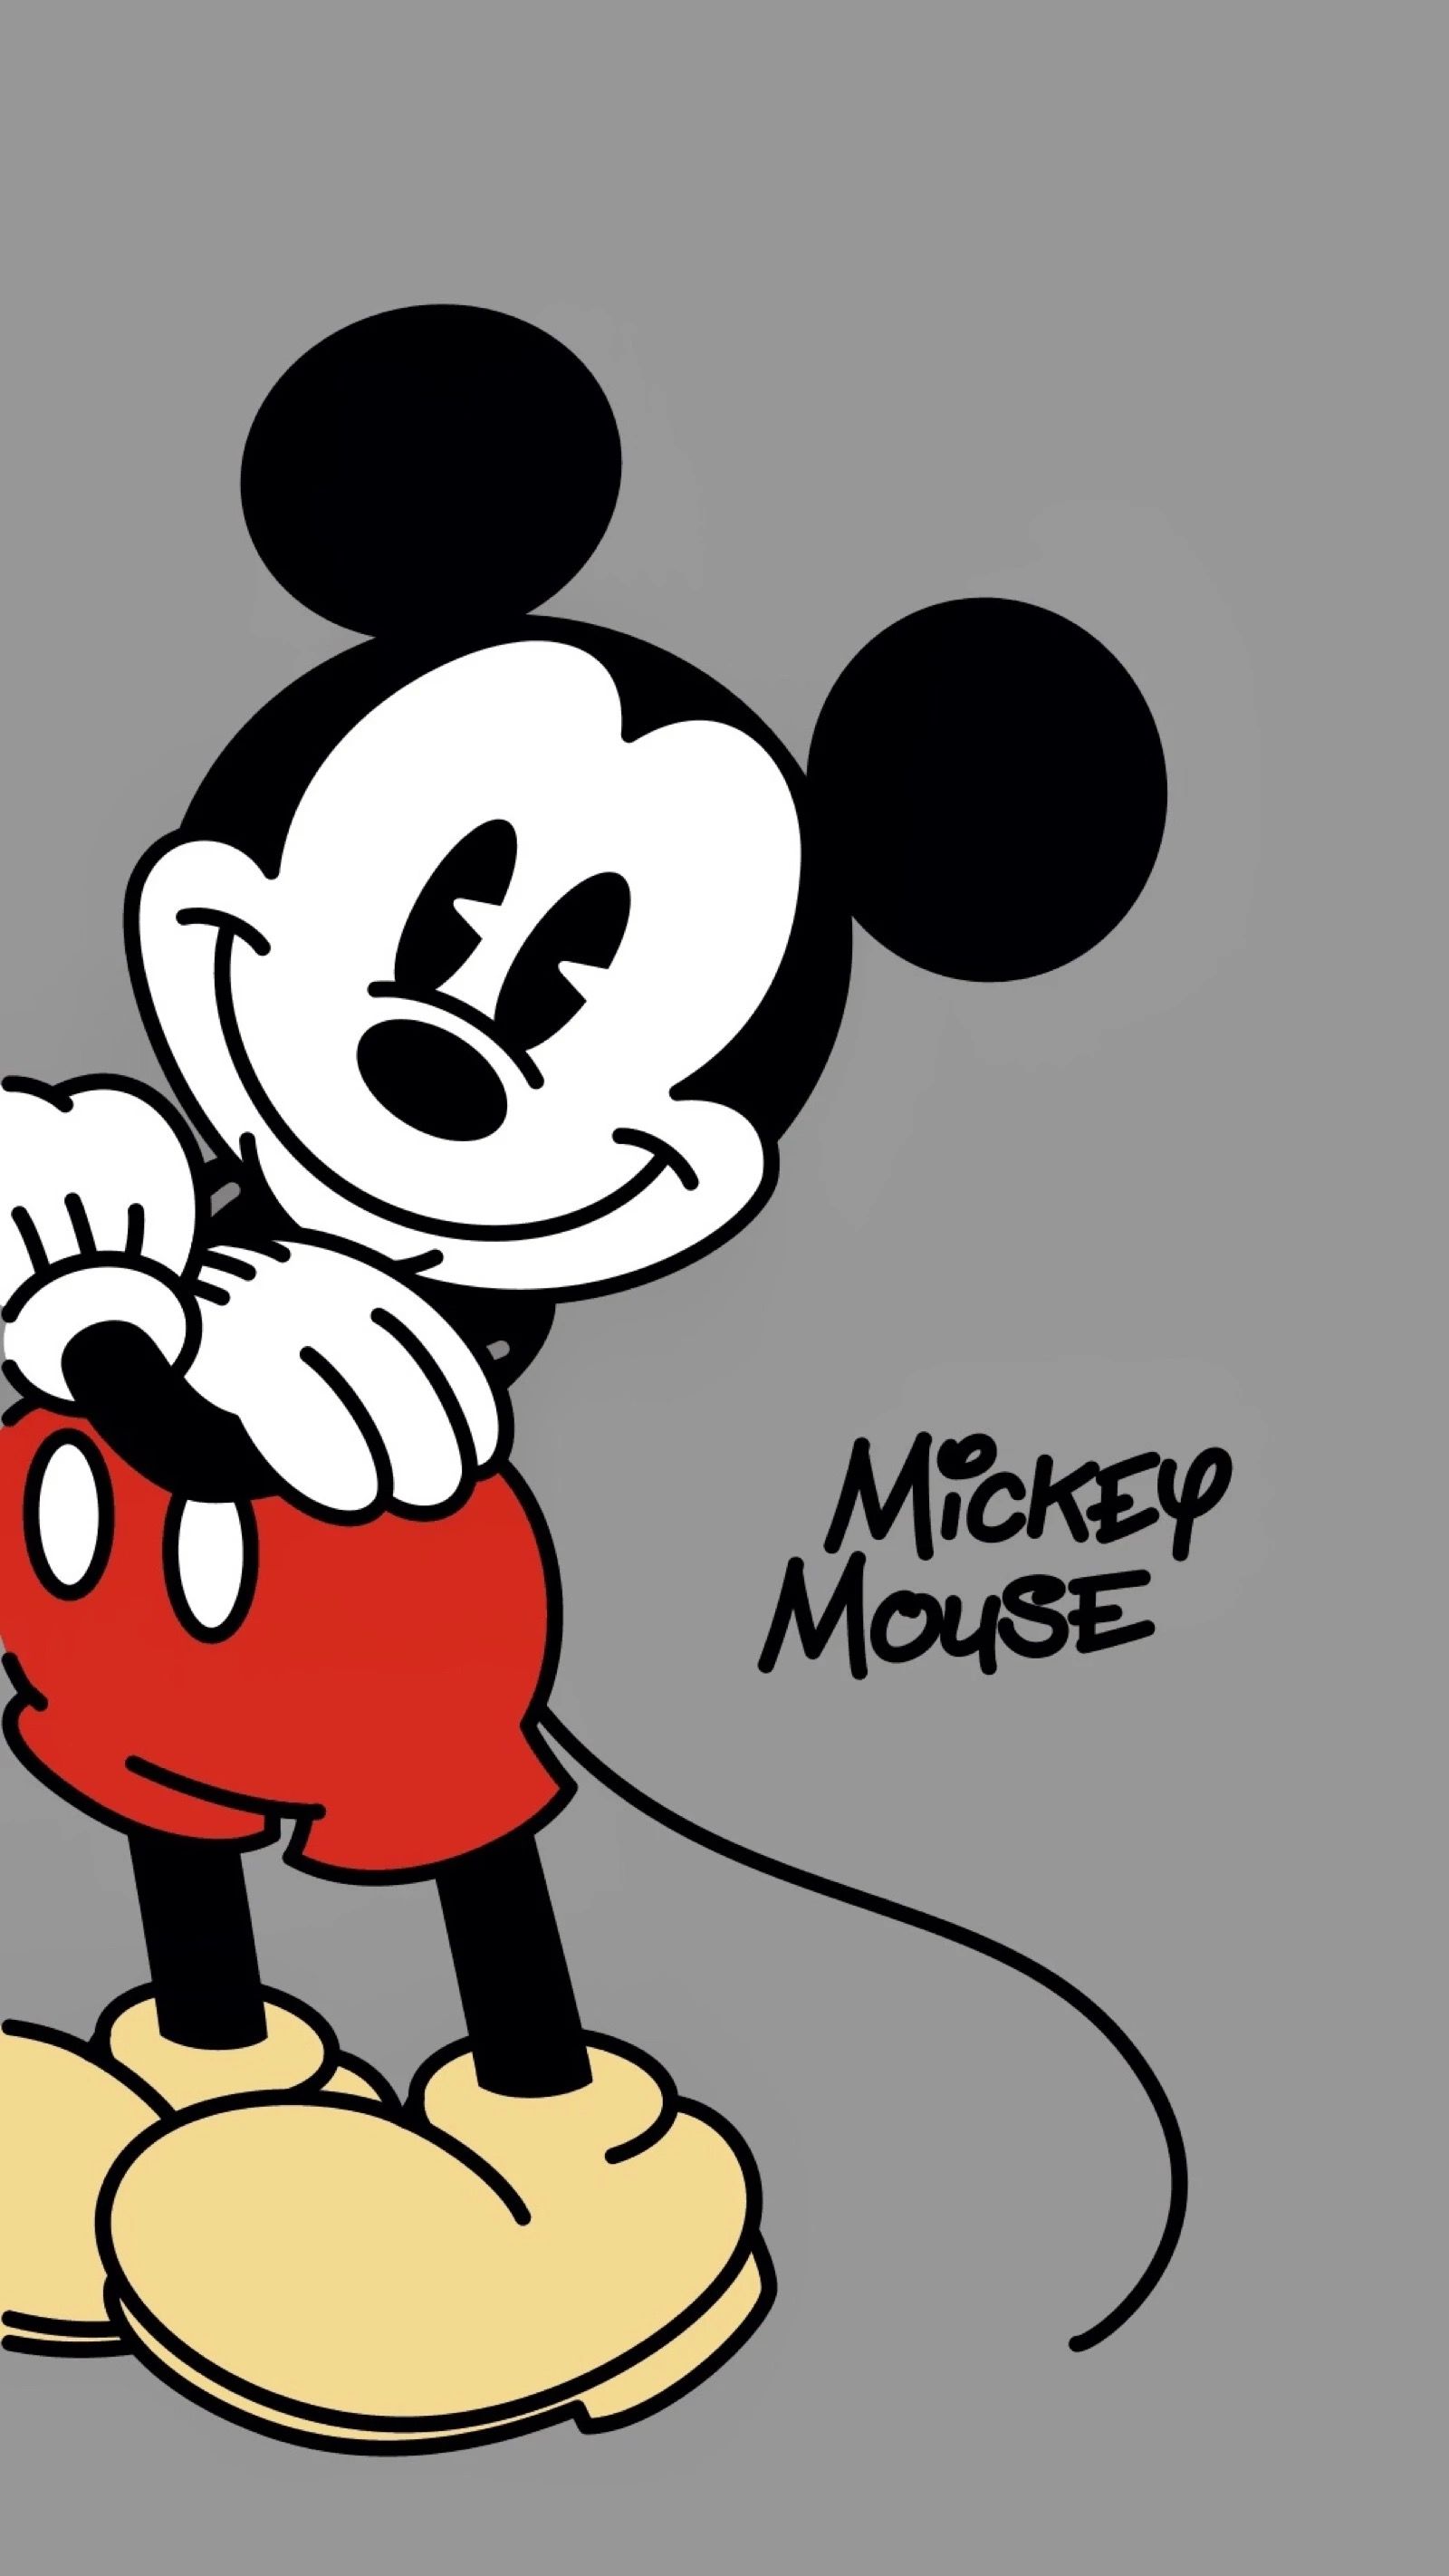 Mickey Mouse wallpaper for iPhone and Android phone - Mickey Mouse